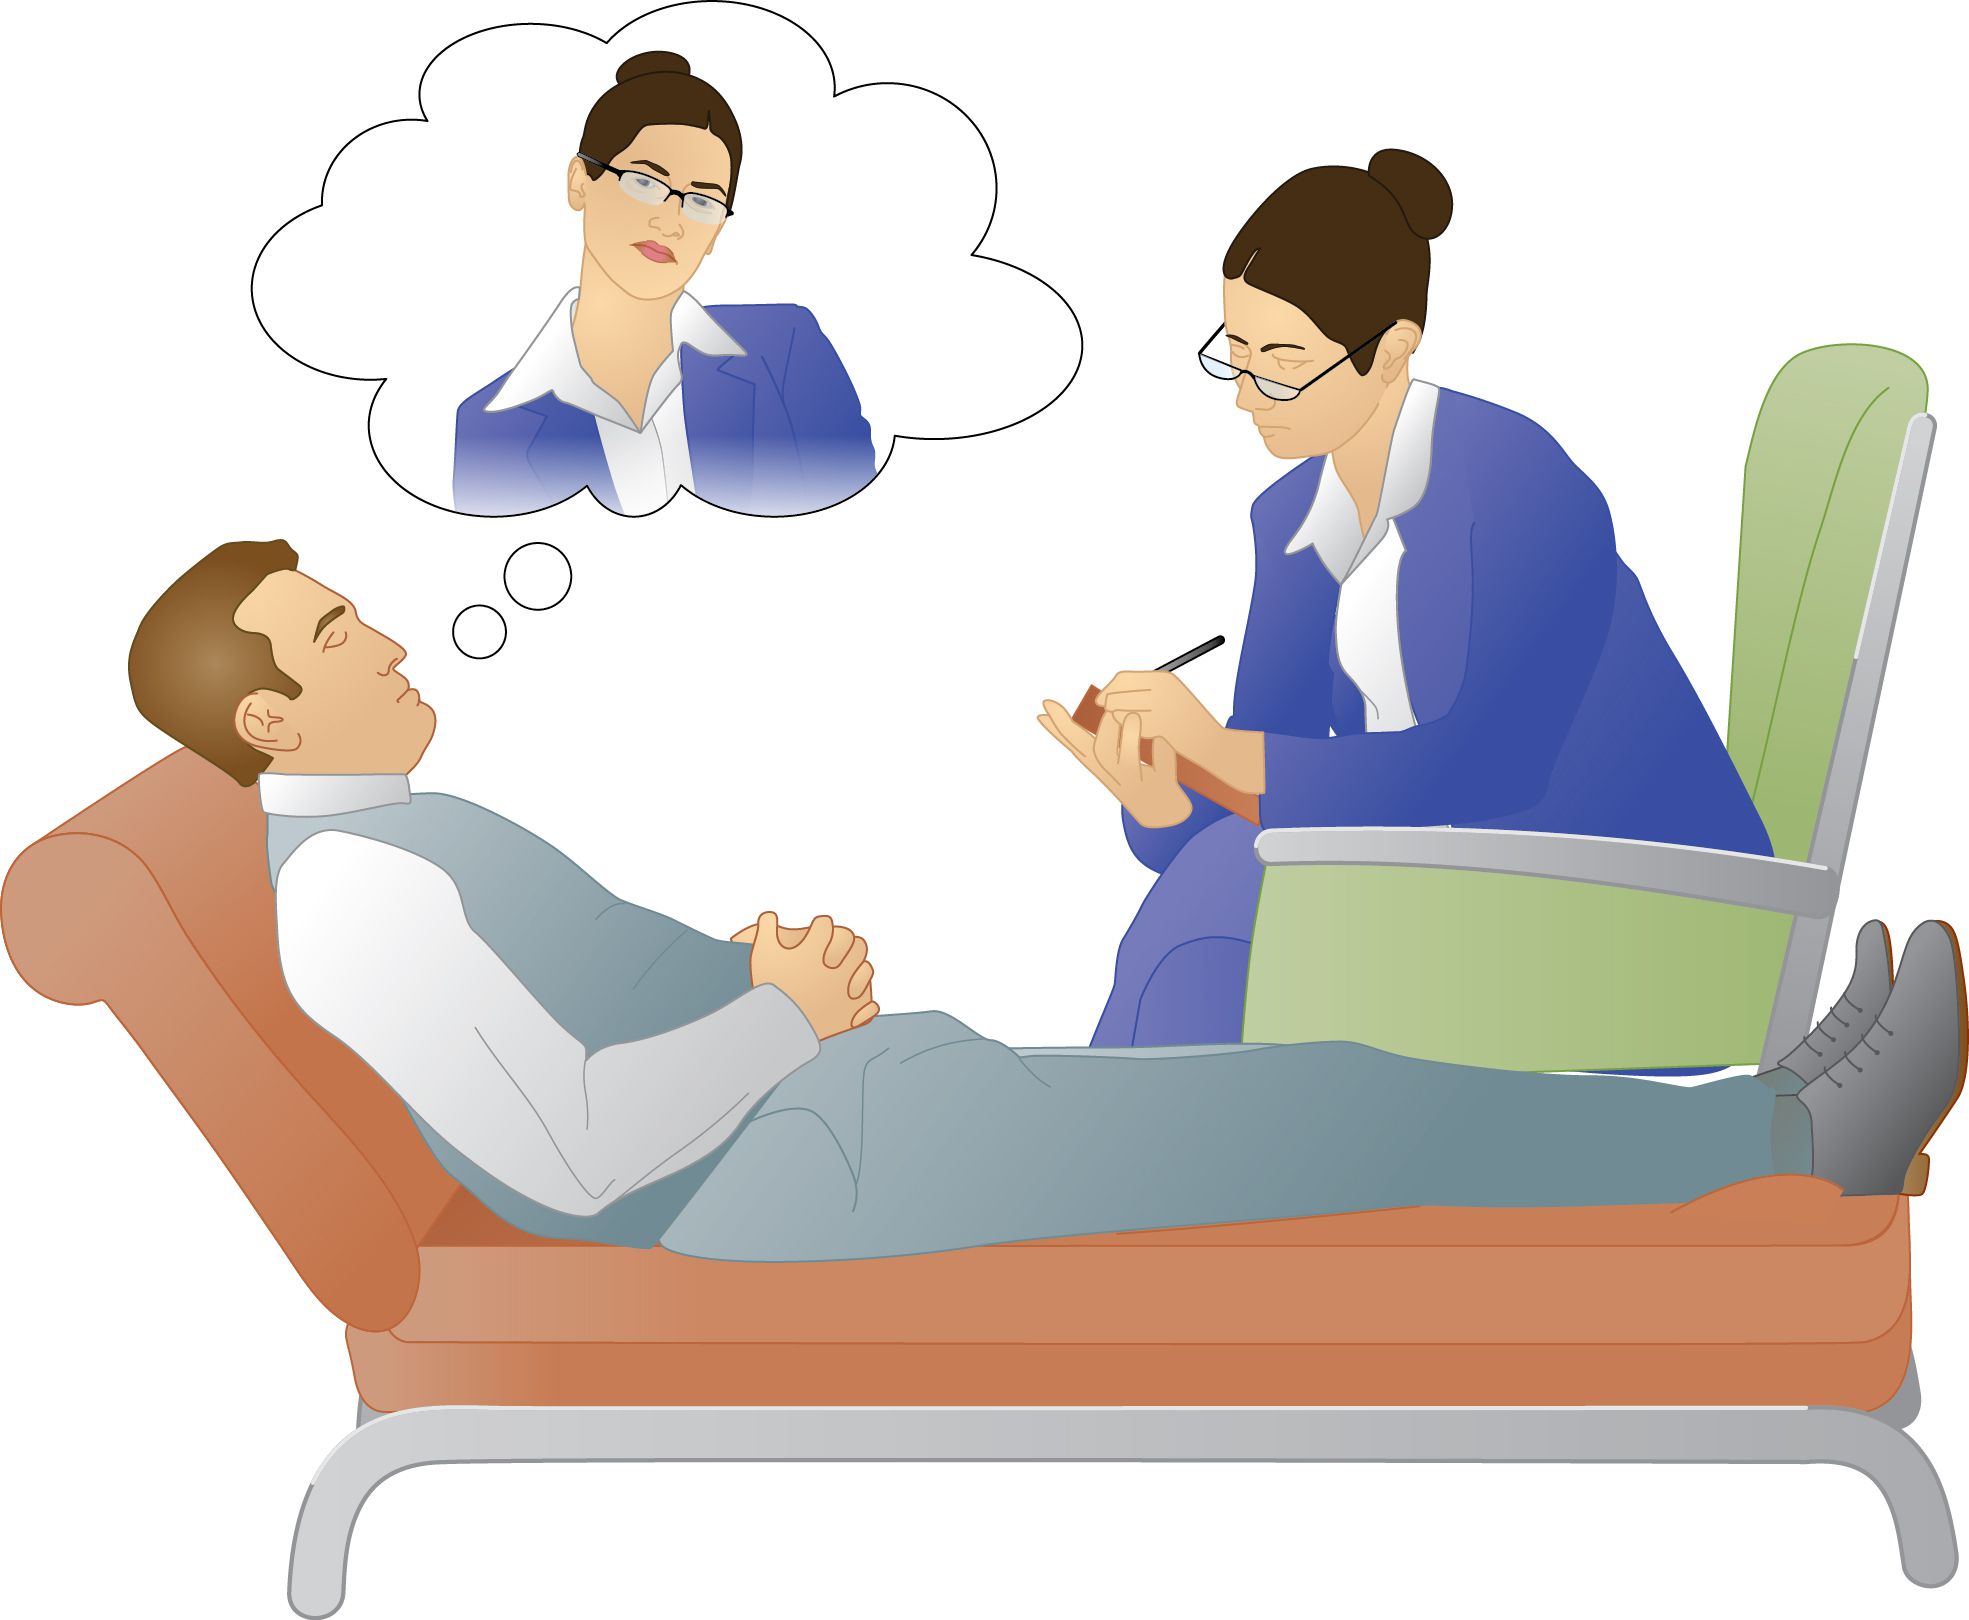 speech bubble over patient’s head; the speech bubble shows the face of the analyst